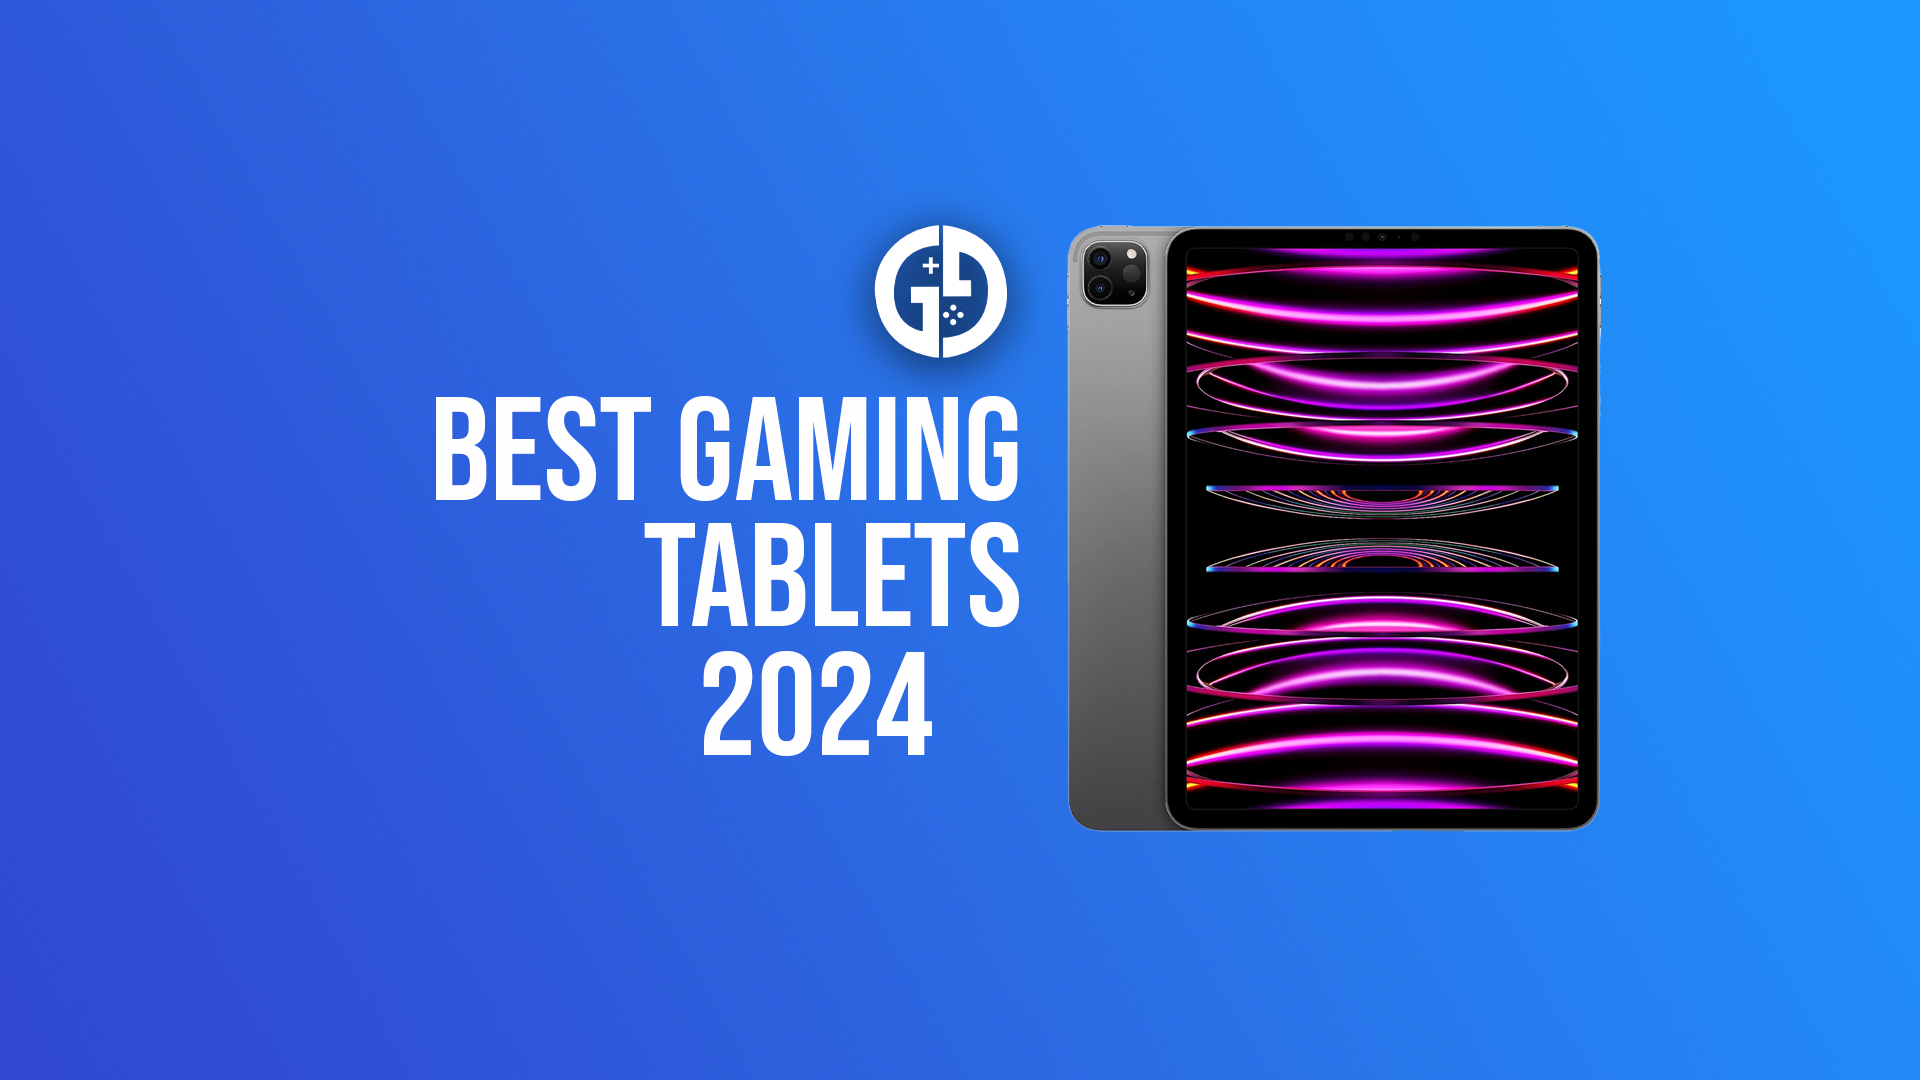 Best gaming tablets in 2024